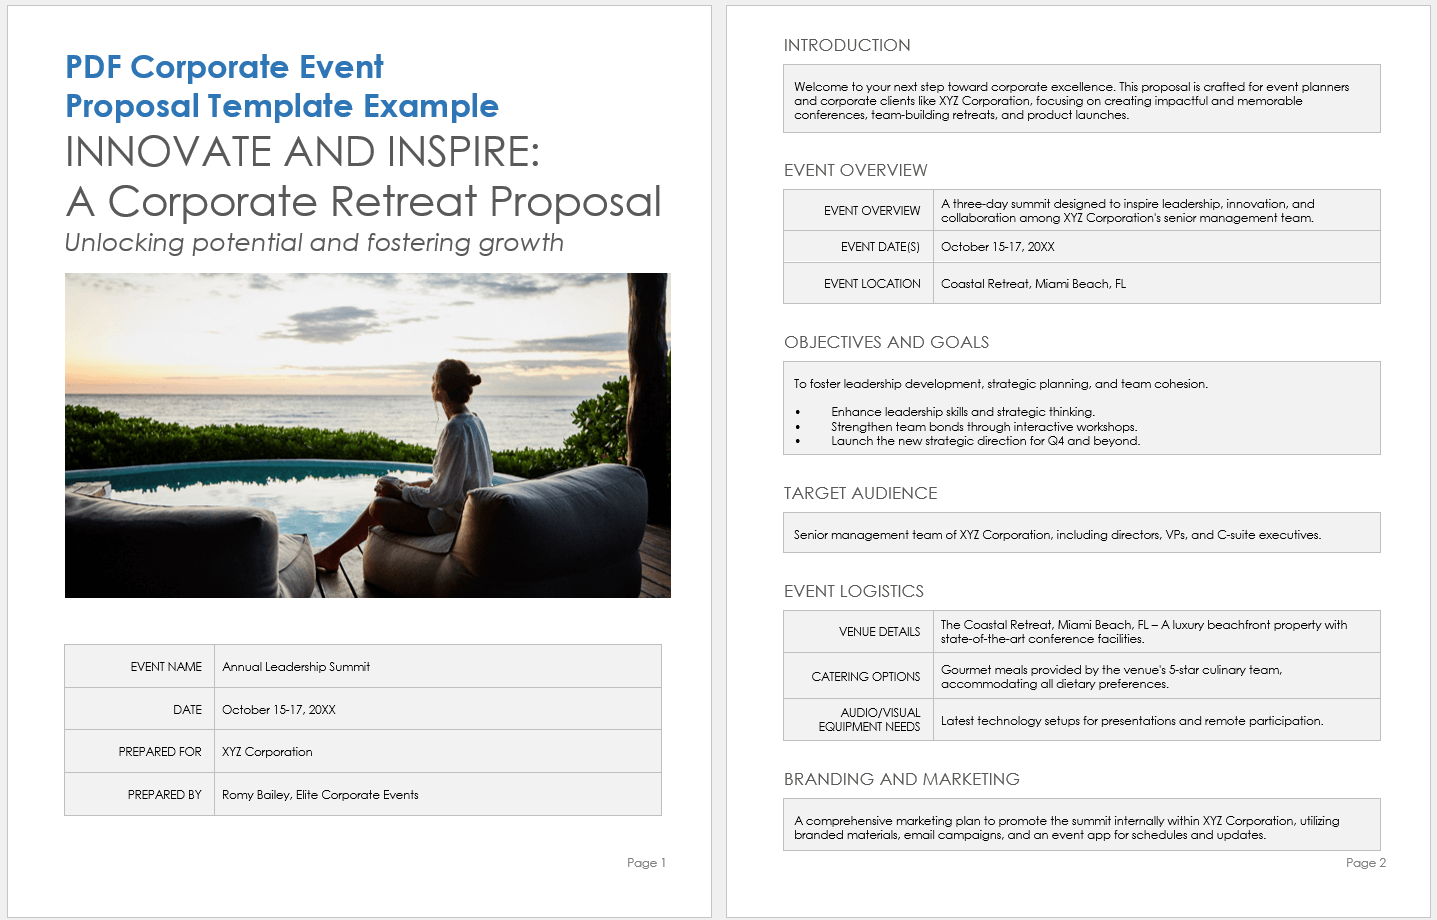 PDF Corporate Event Proposal Template Example